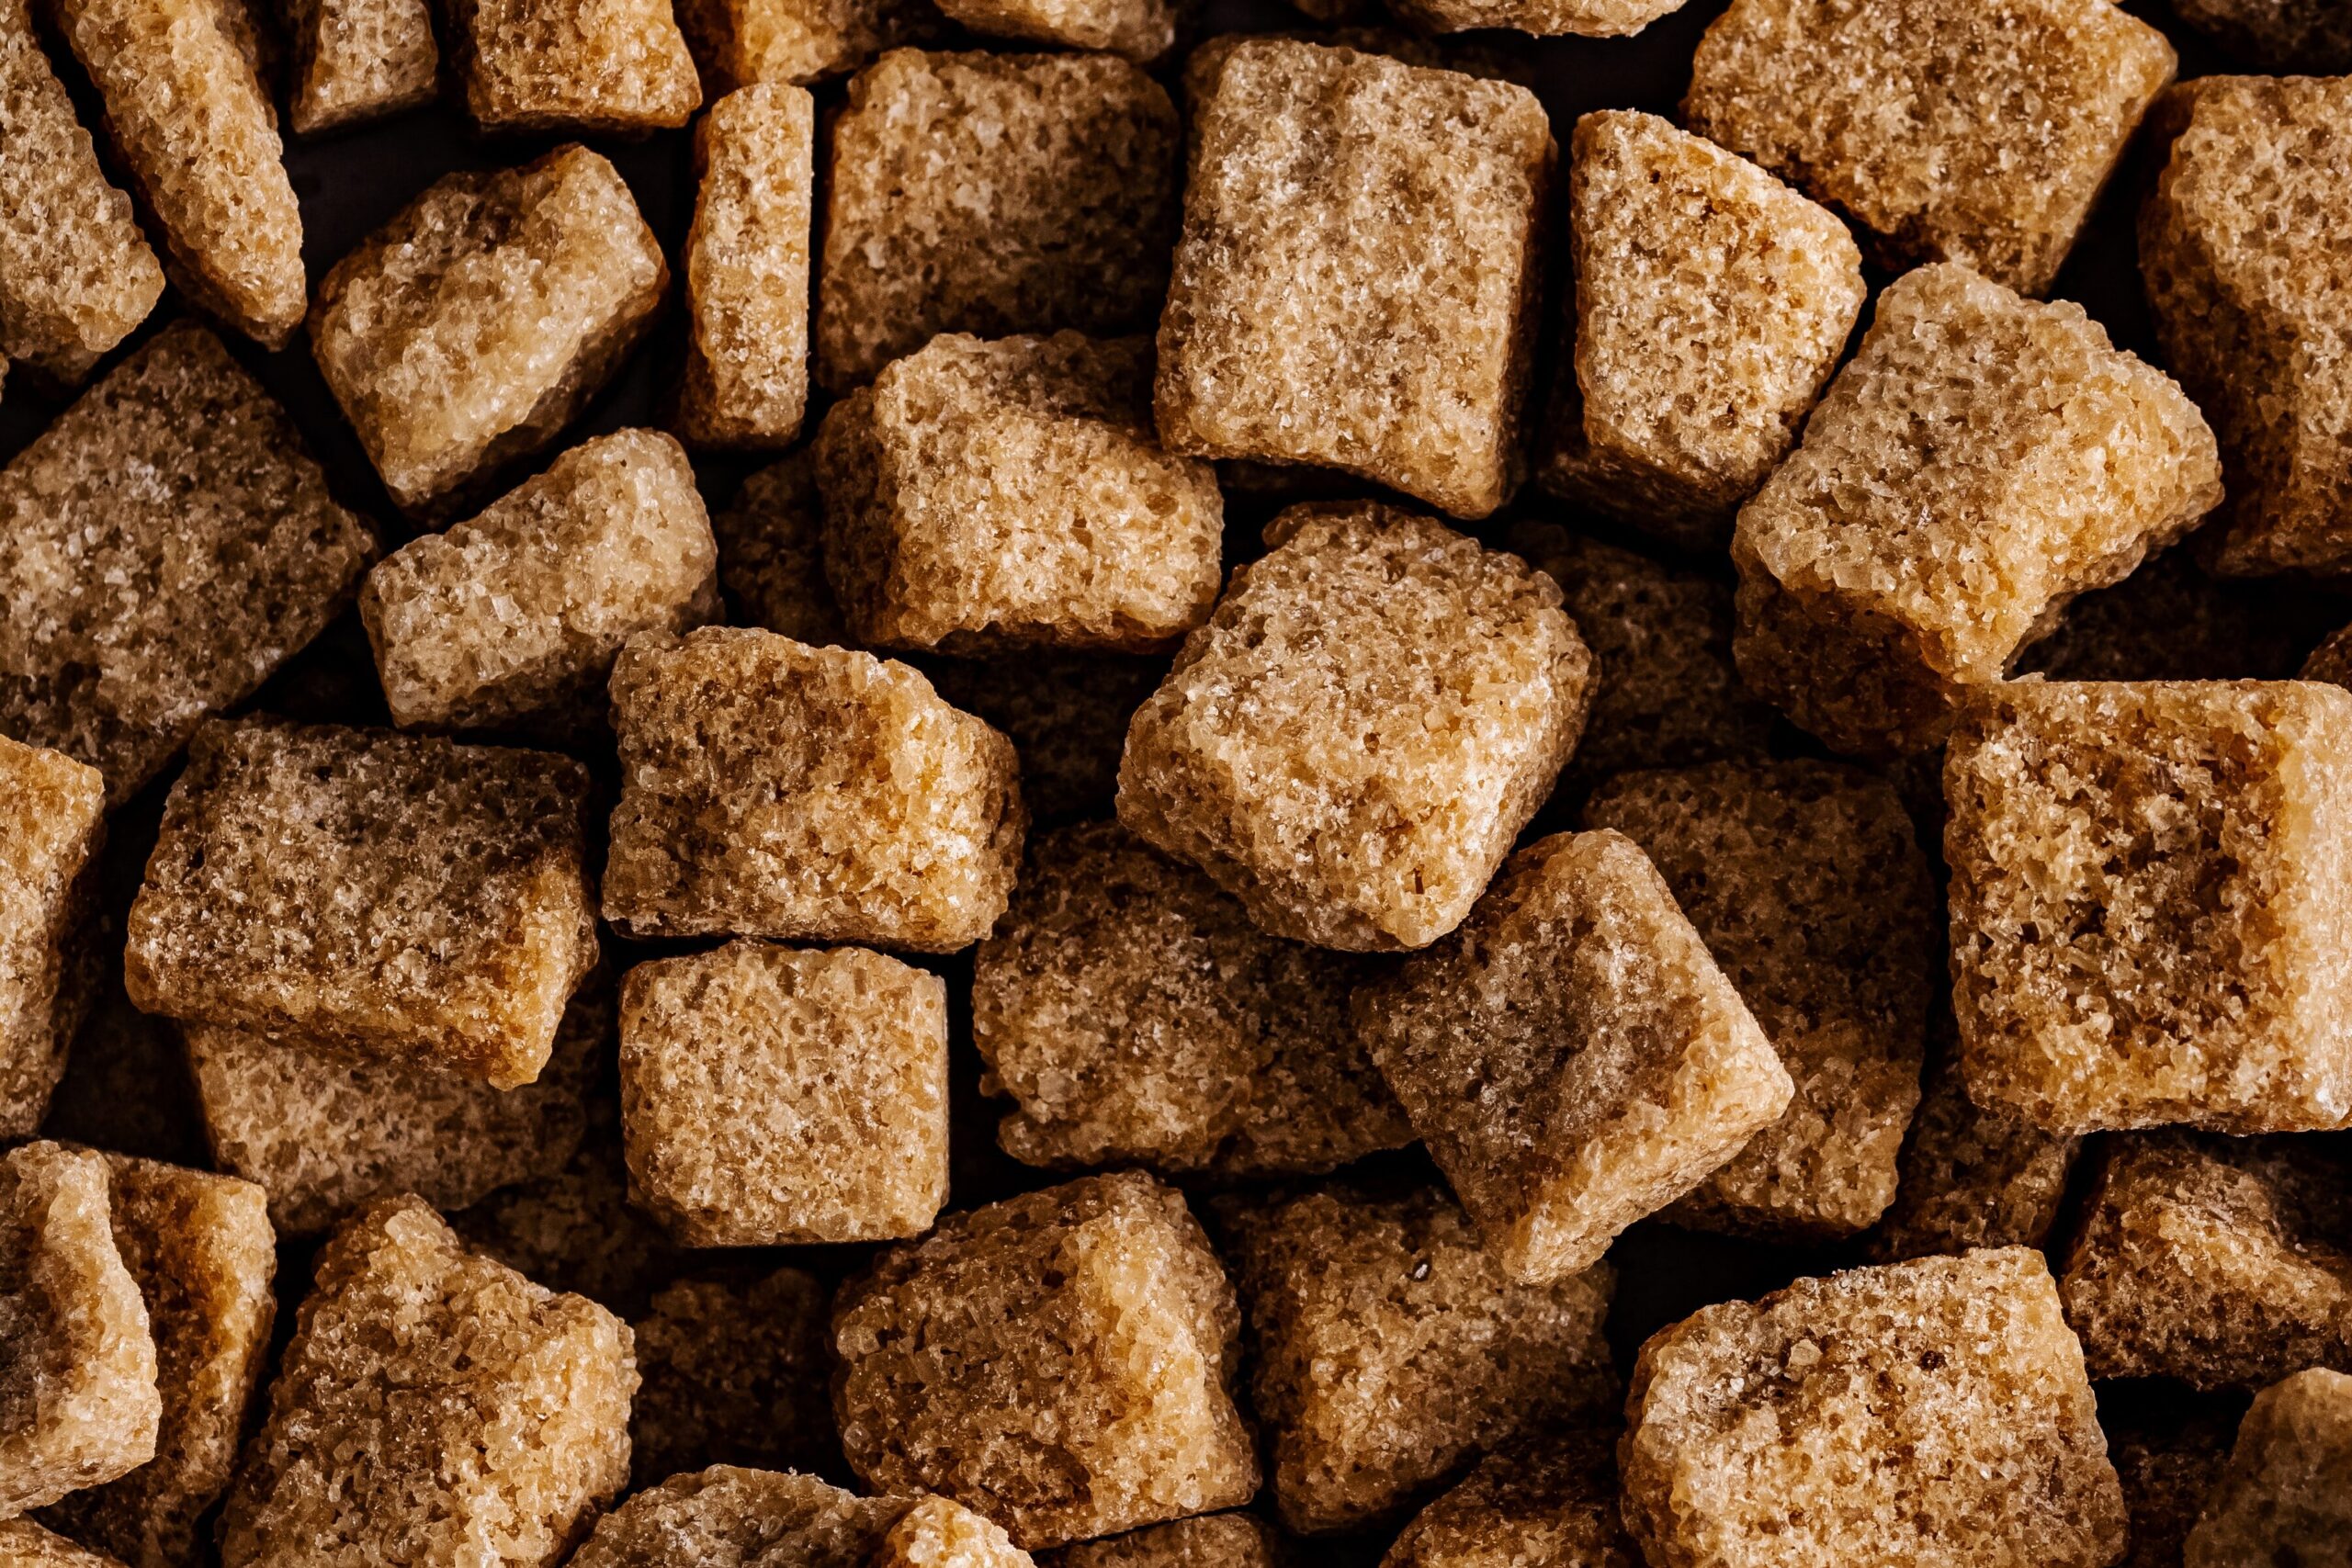 A bunch of brown sugar cubes.